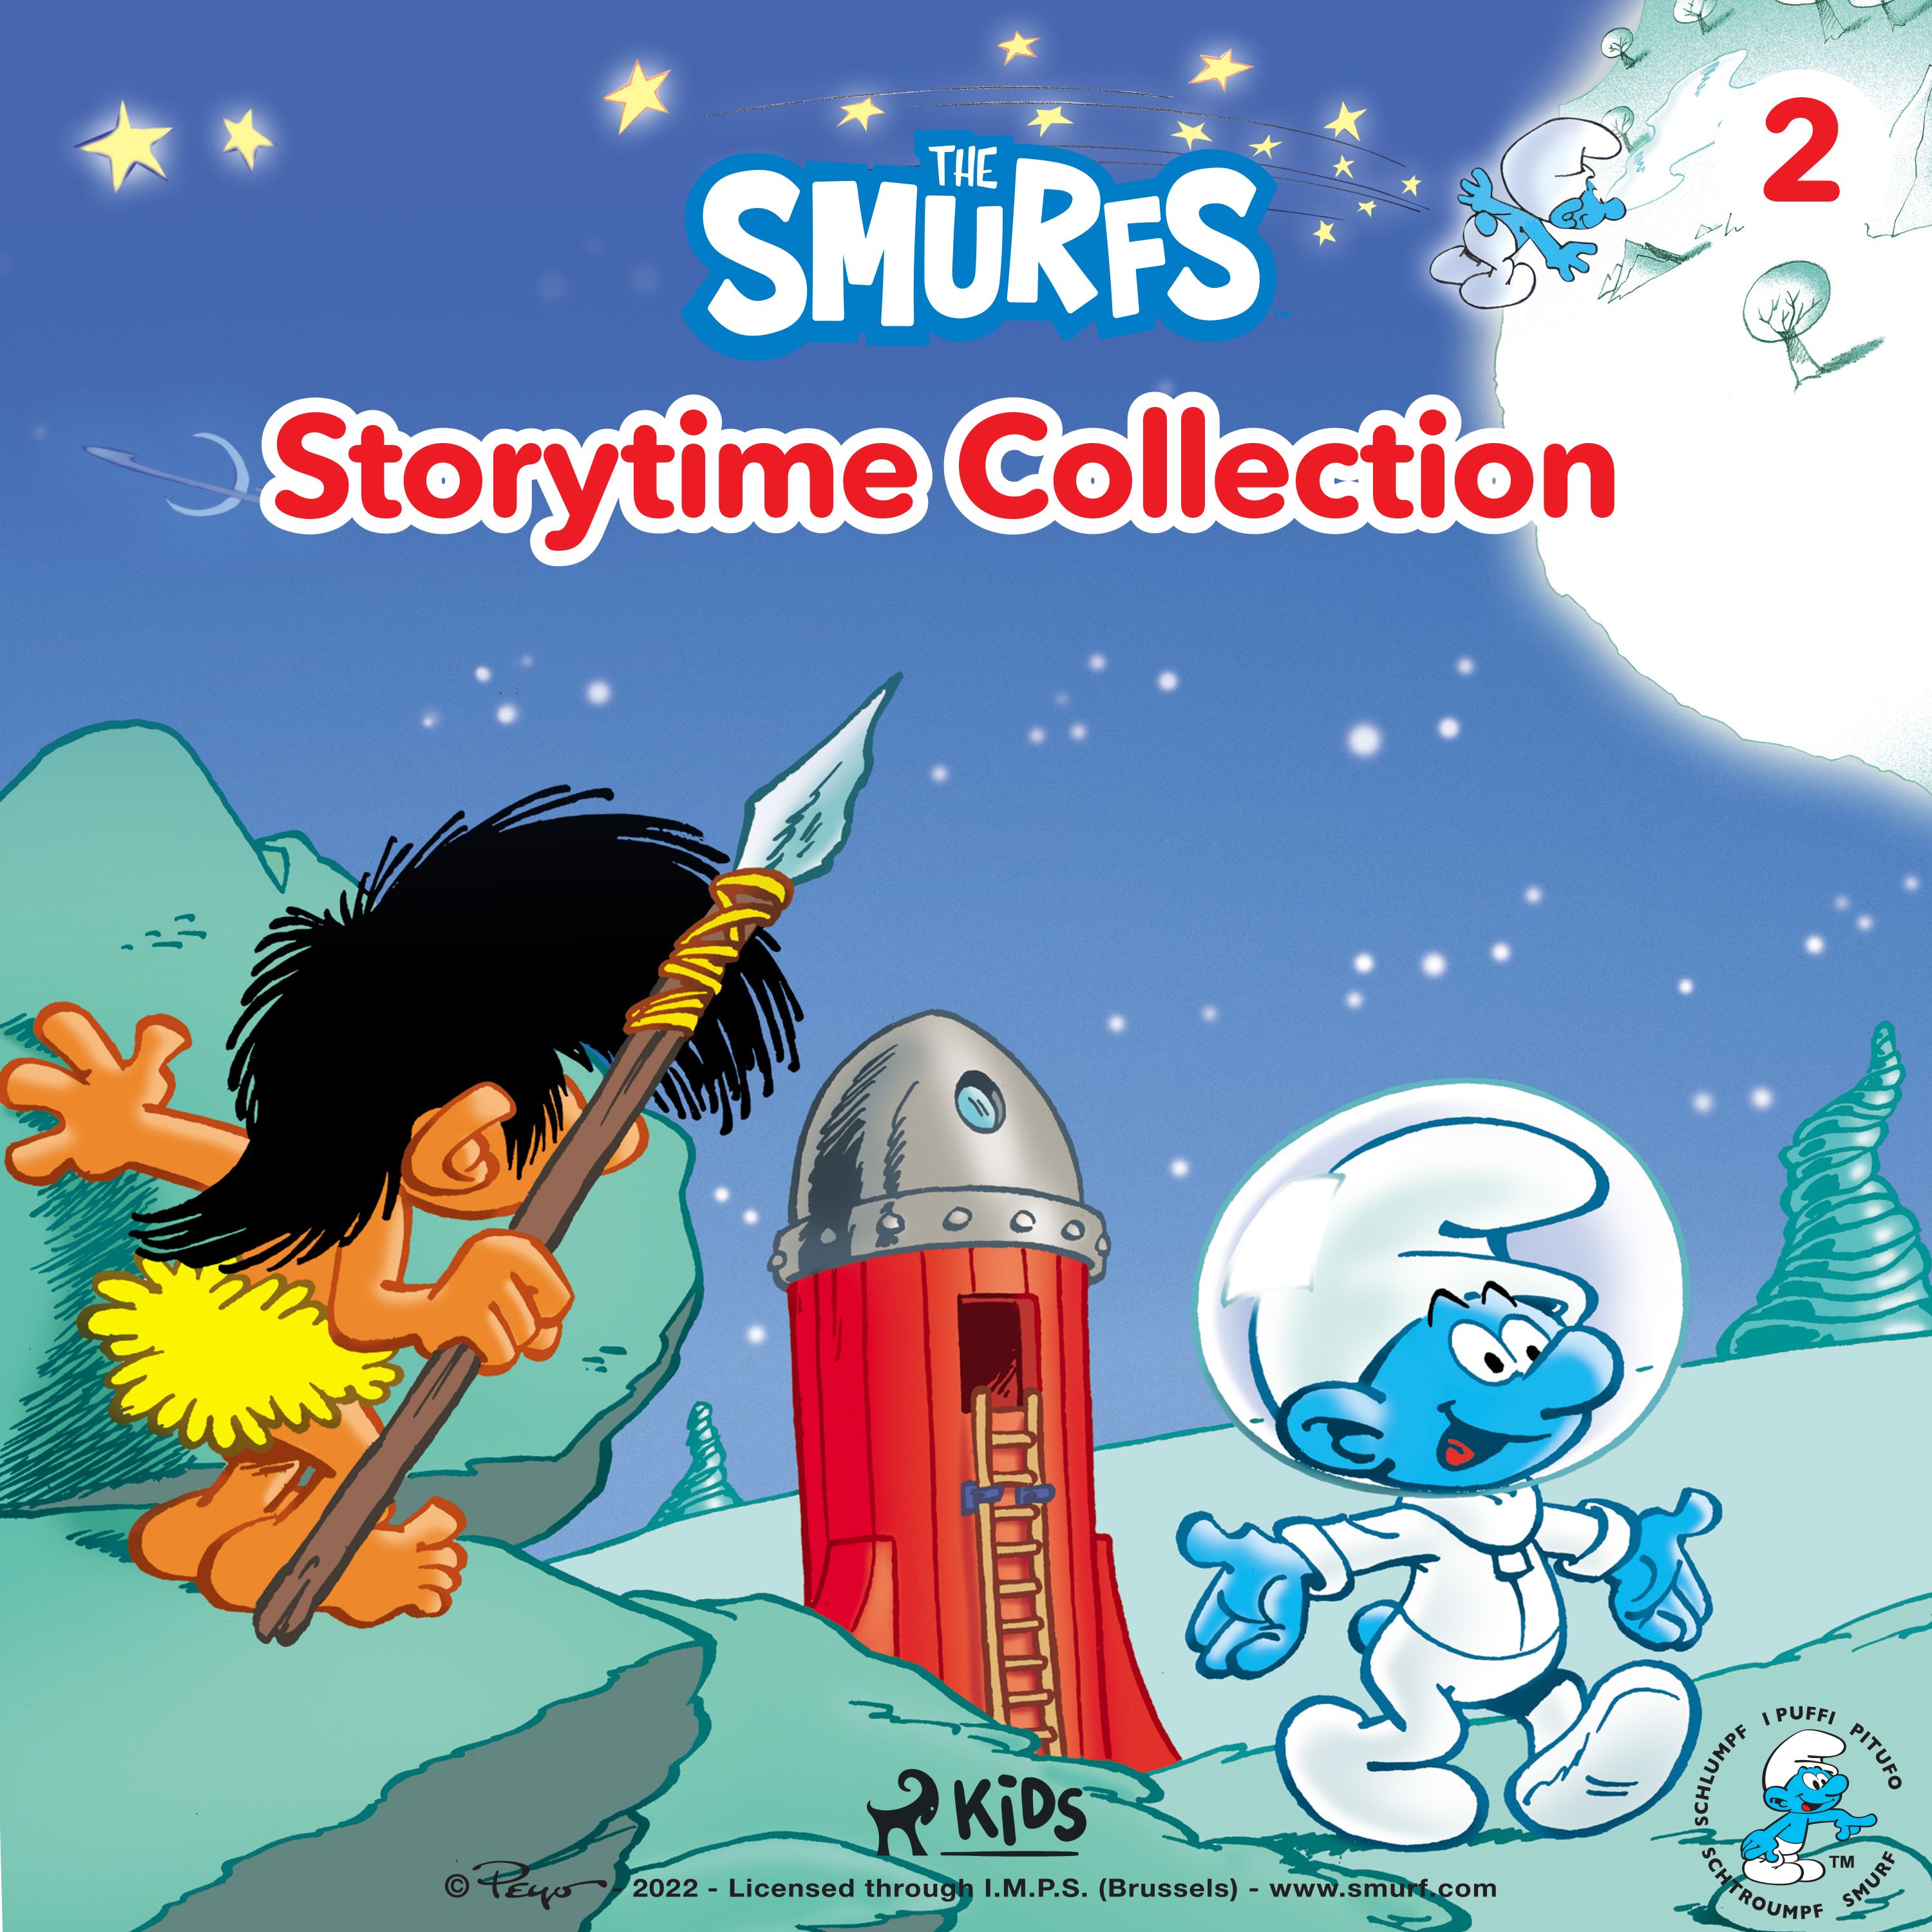 Smurfs: Storytime Collection 2, audiobook by Peyo